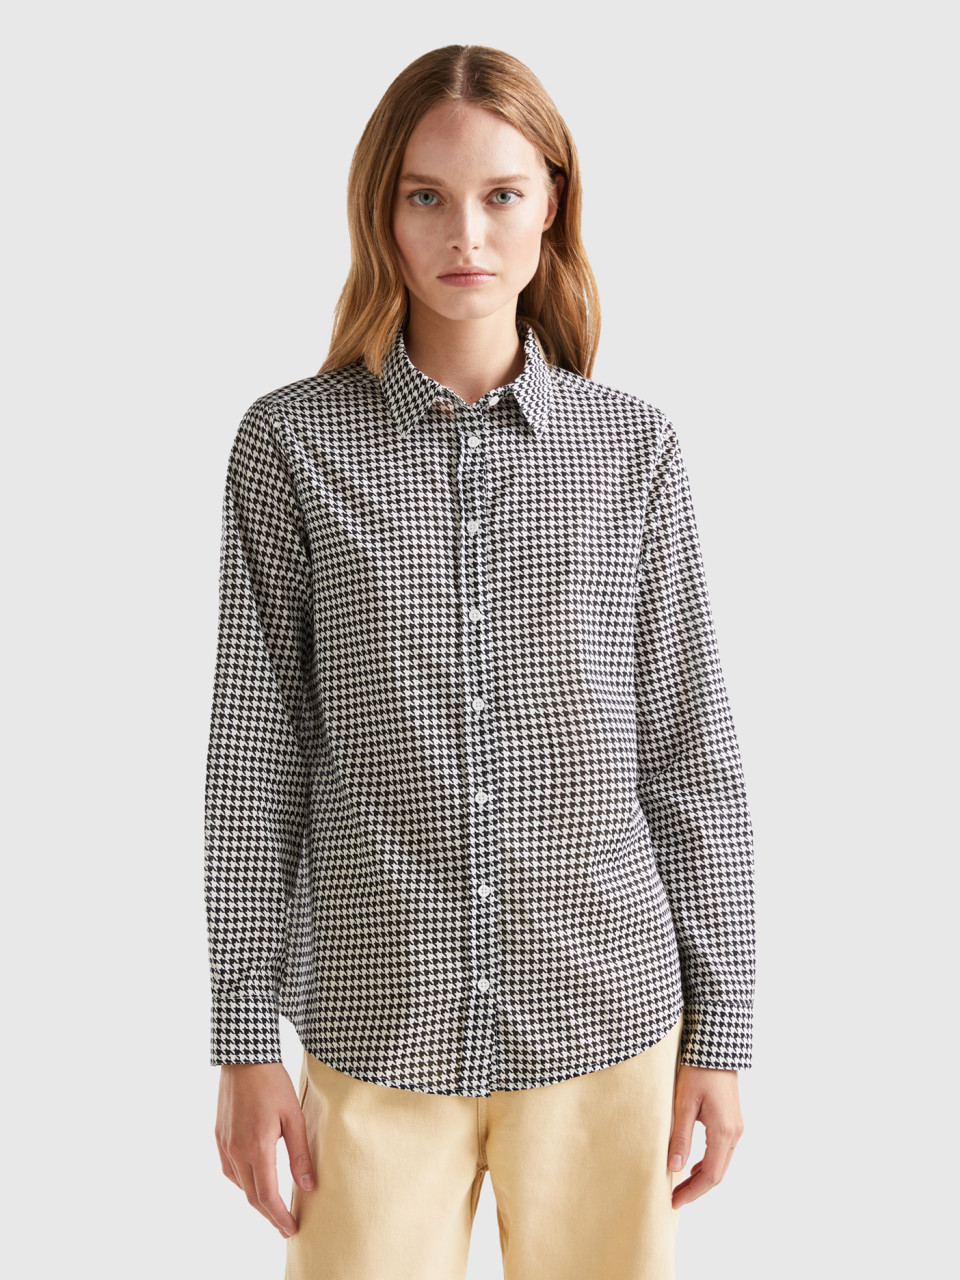 Benetton, Black And White Houndstooth Shirt, Multi-color, Women